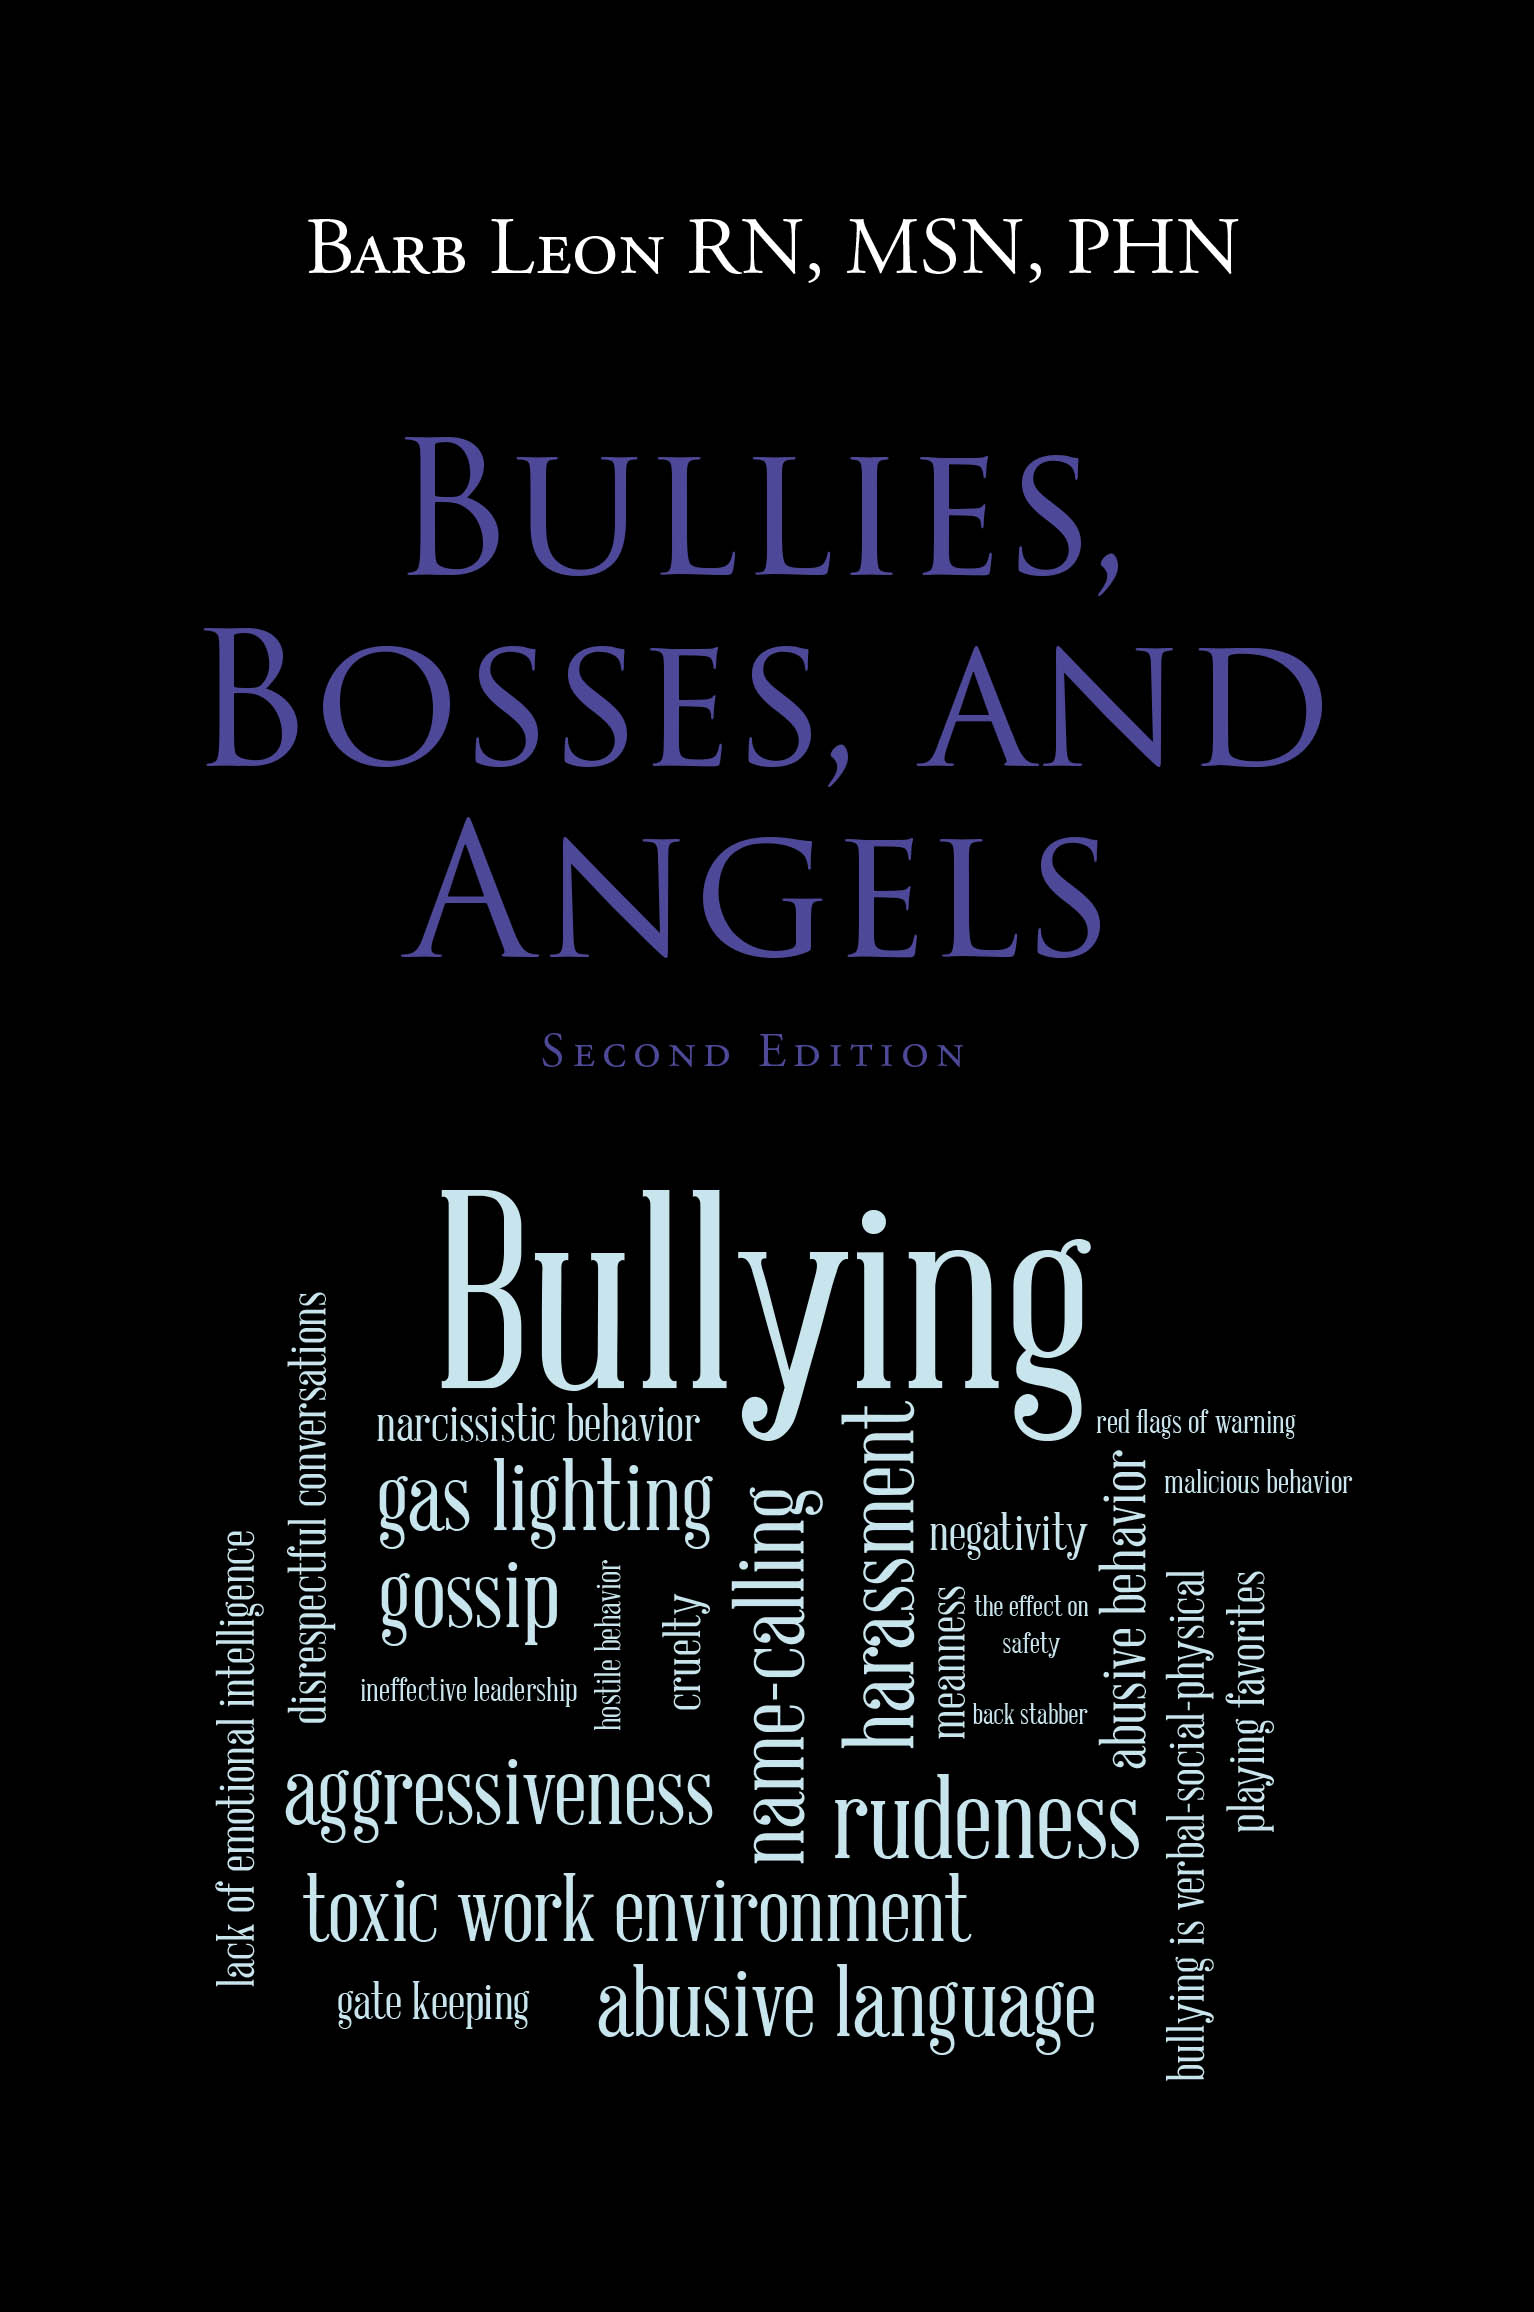 Bullies, Bosses, and Angels Cover Image